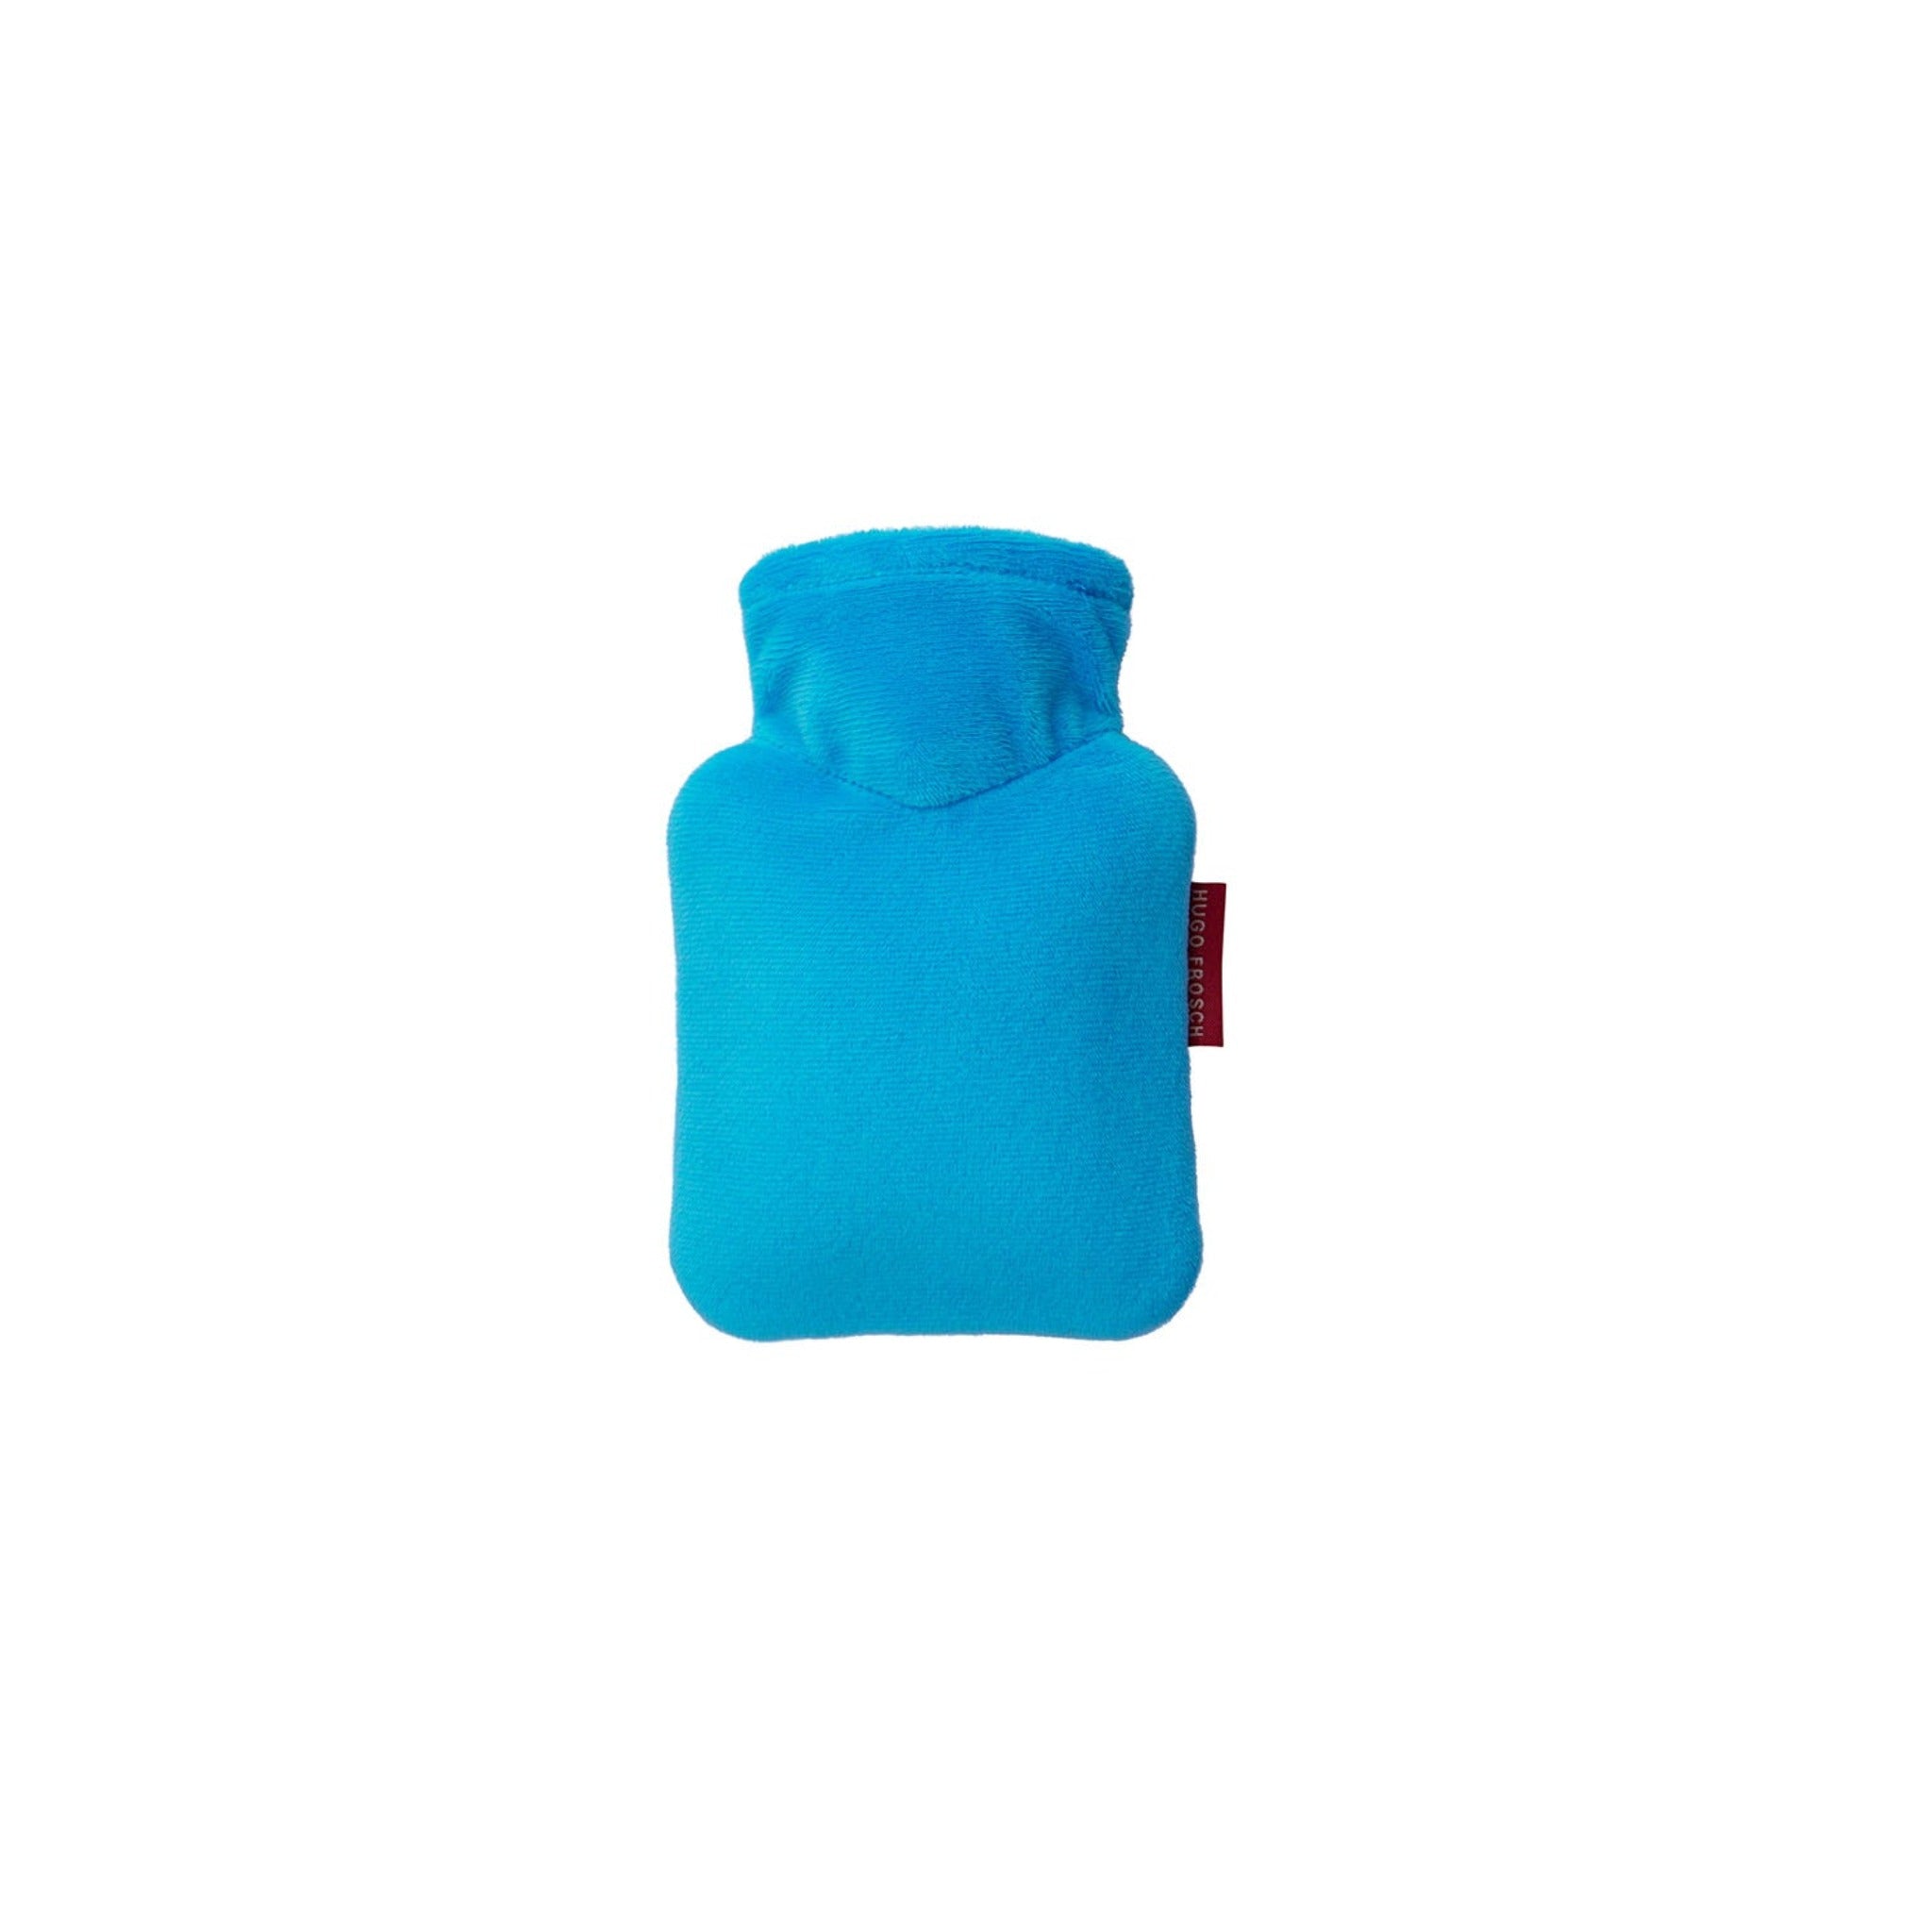 Small Hot Water Bottles < 1.5 Litres